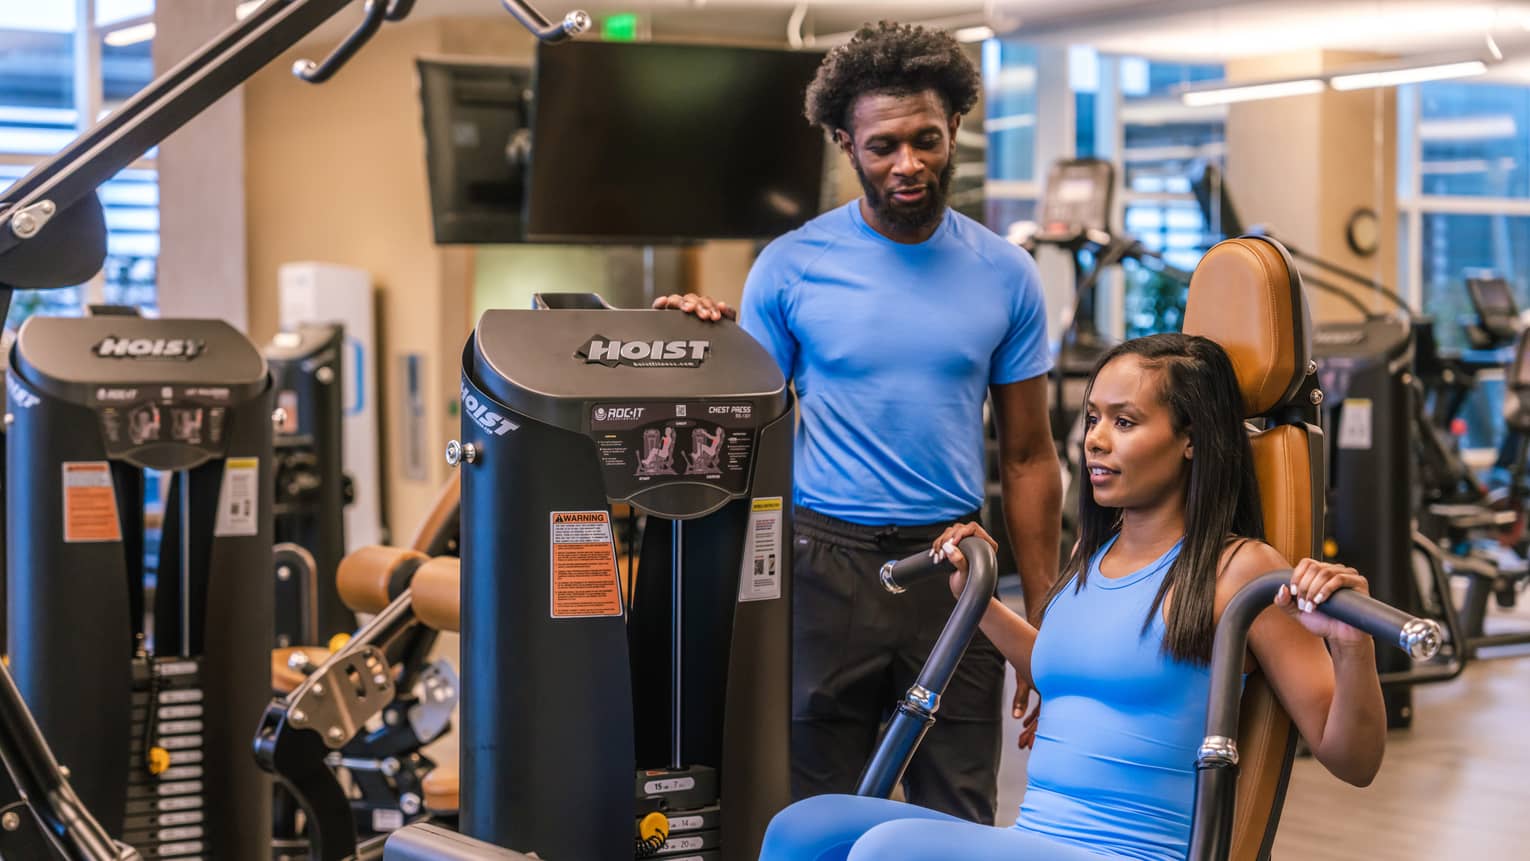 Two guests in a gym, one guest using a gym machine.